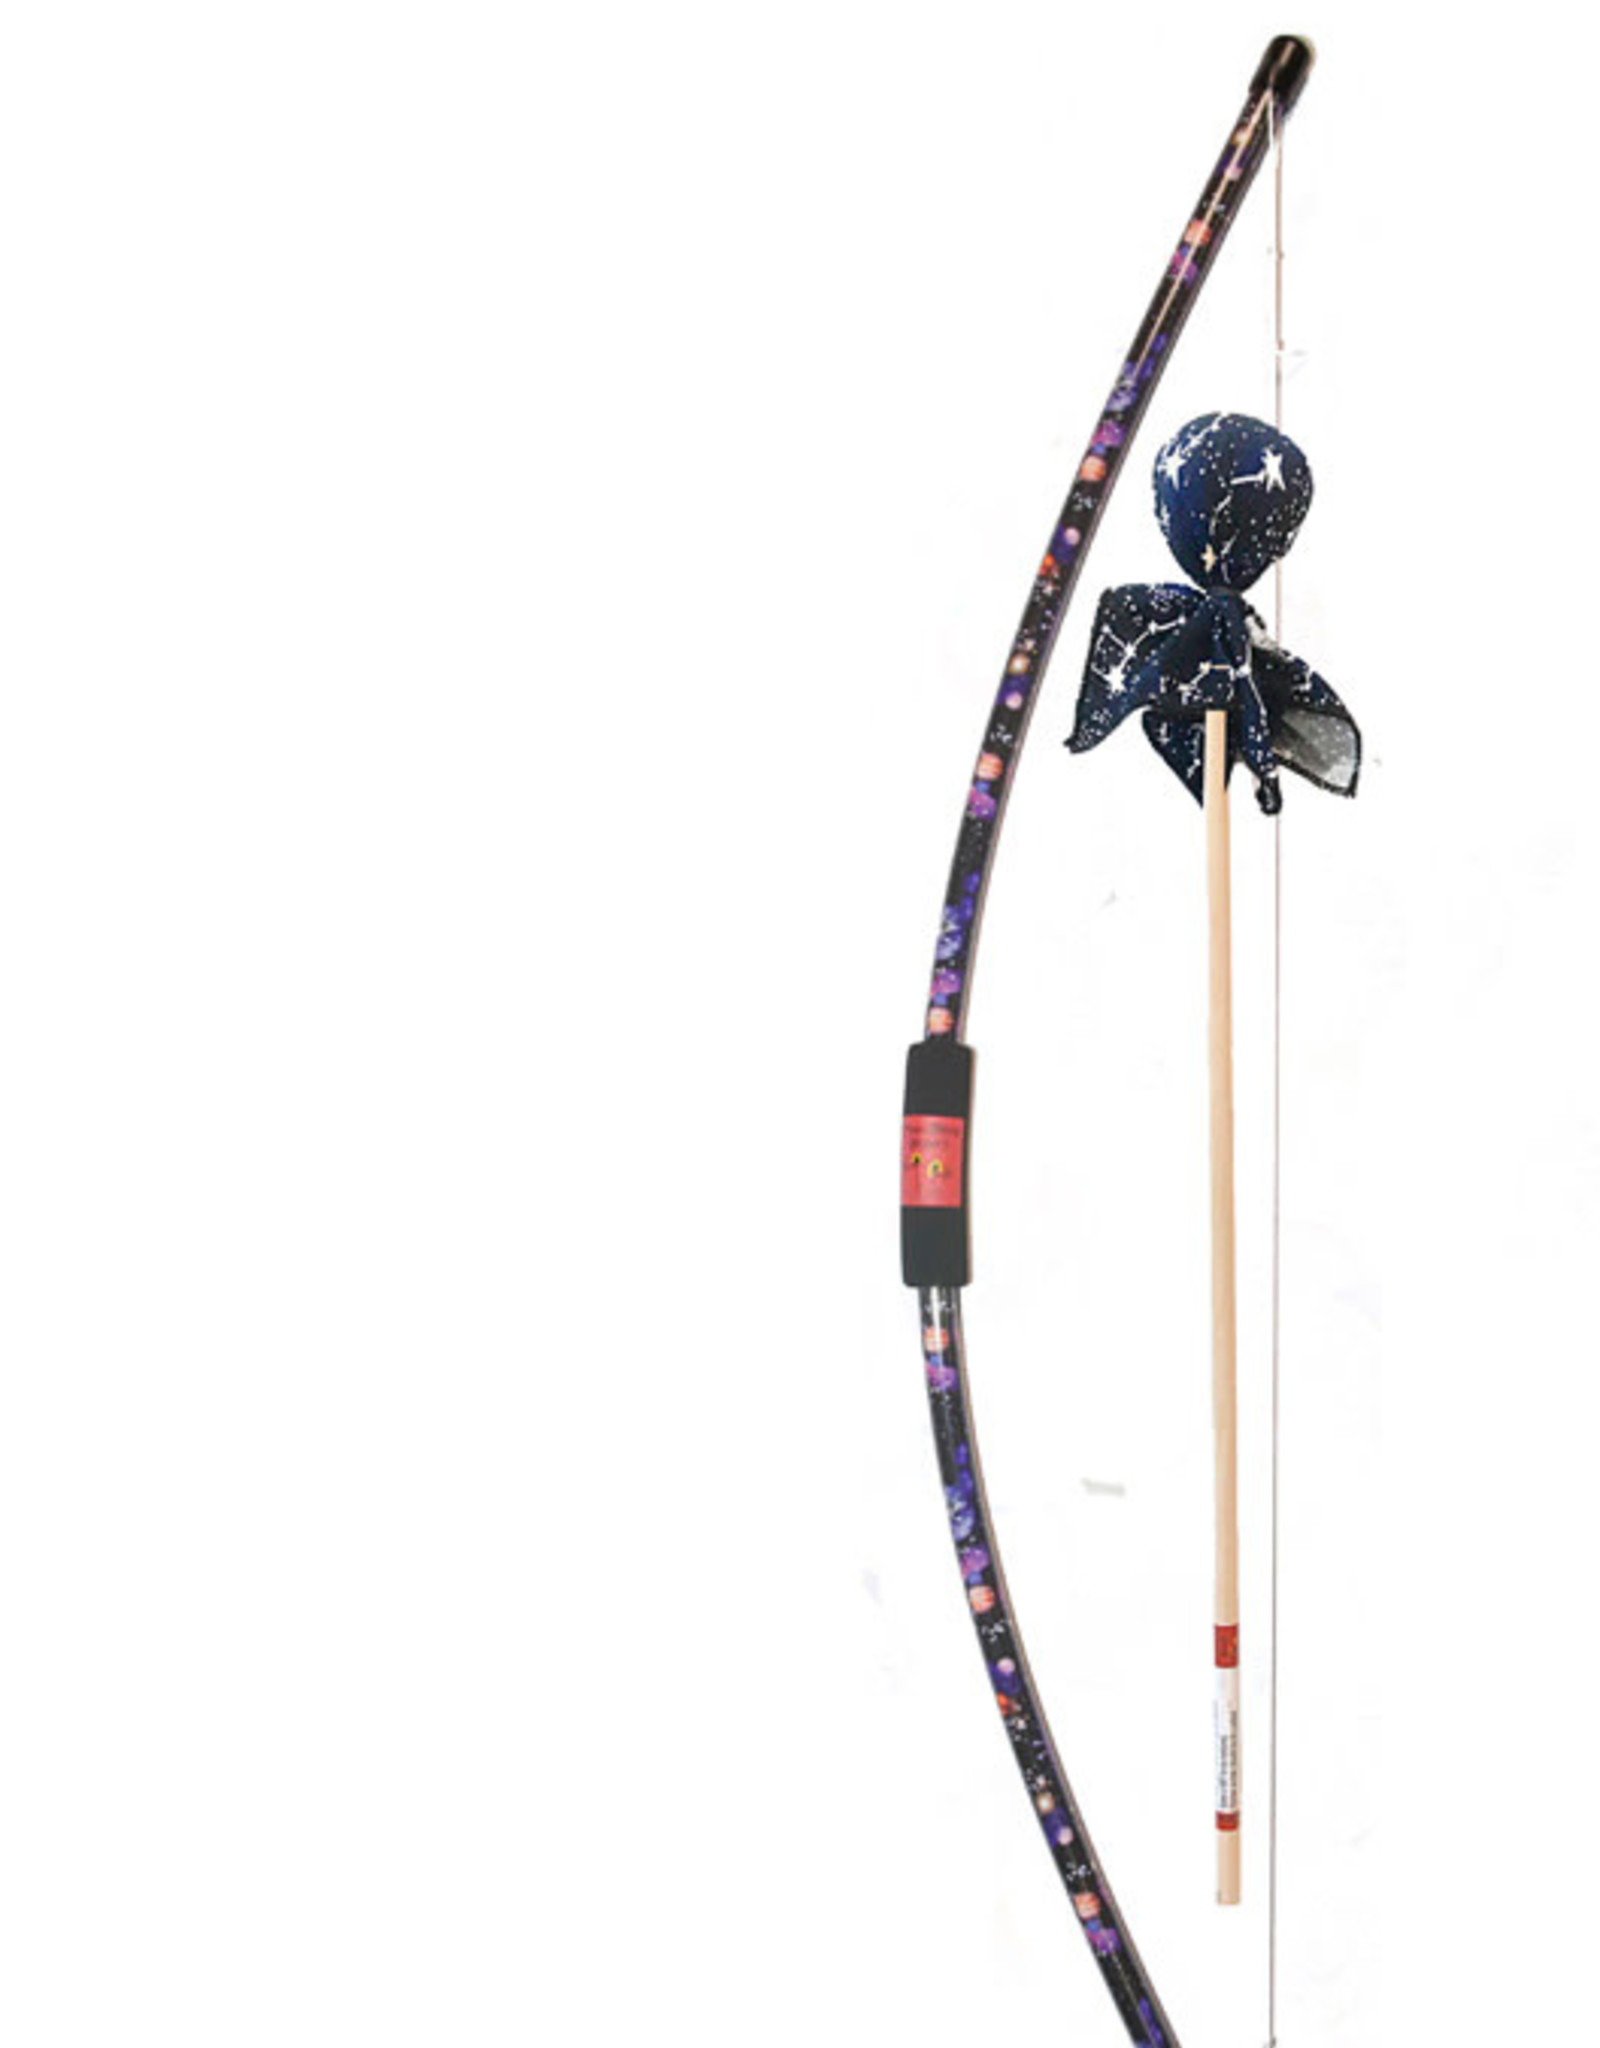 Galaxy Bow and Arrow Set. Two Arrows, Target